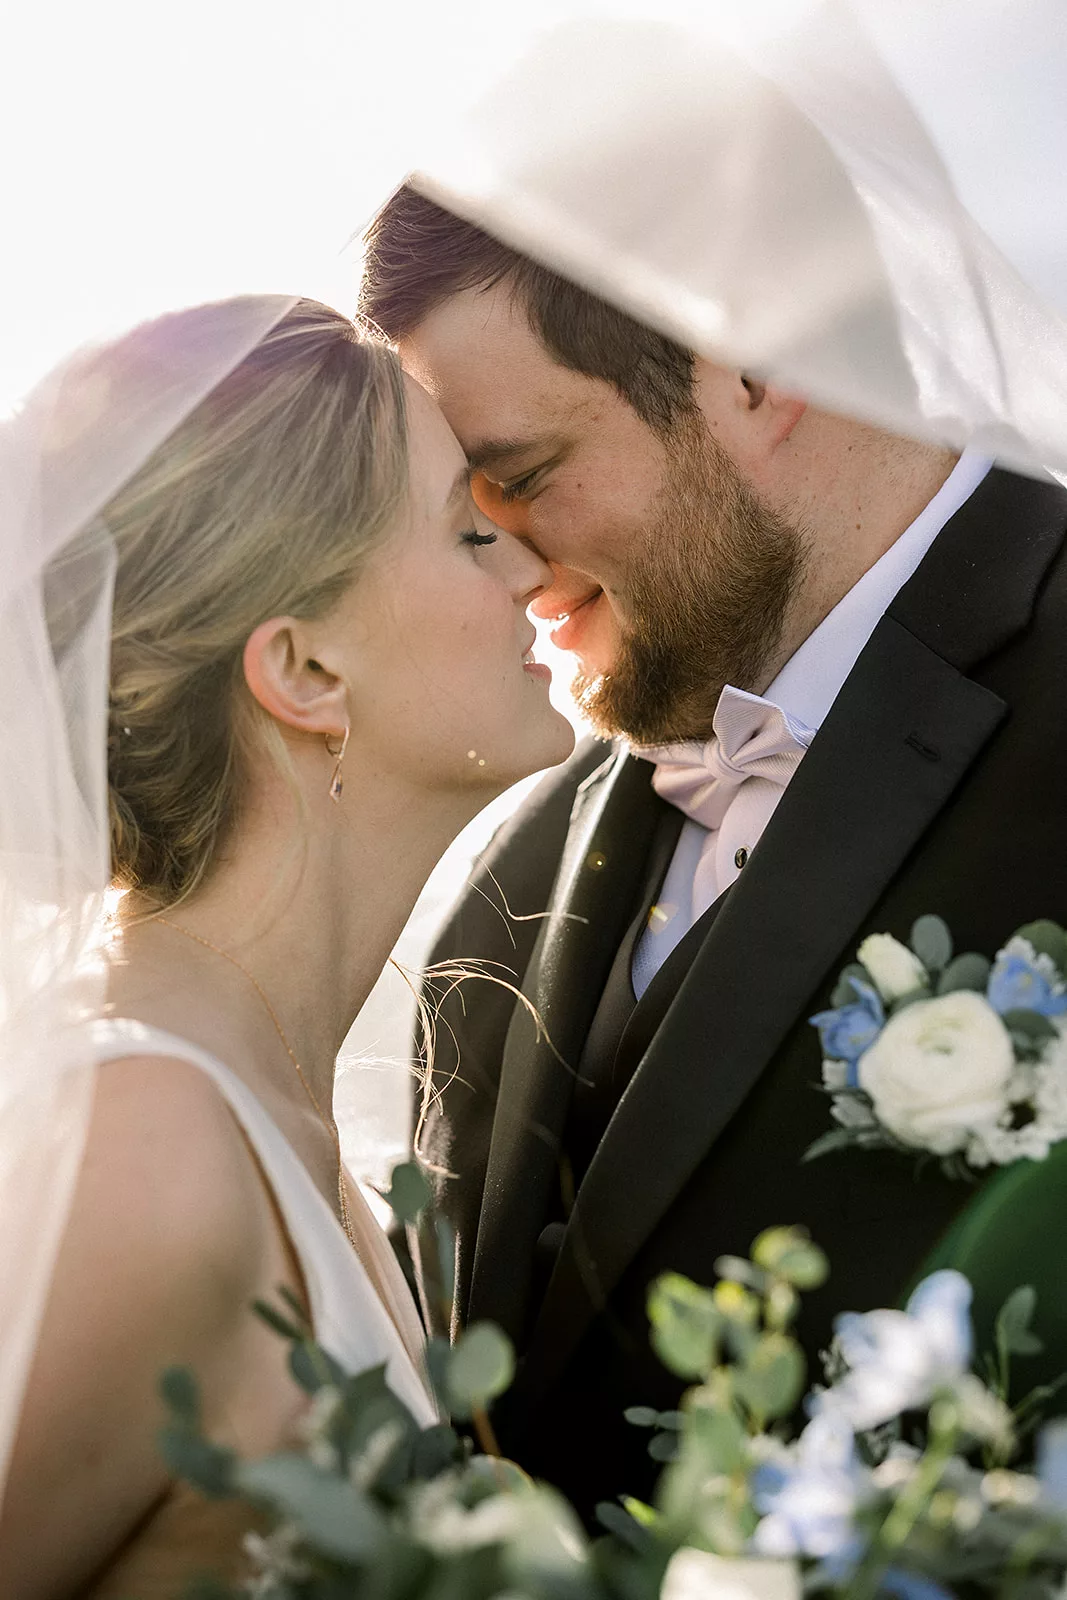 Newlyweds lean in for a kiss while hiding under a veil at sunset